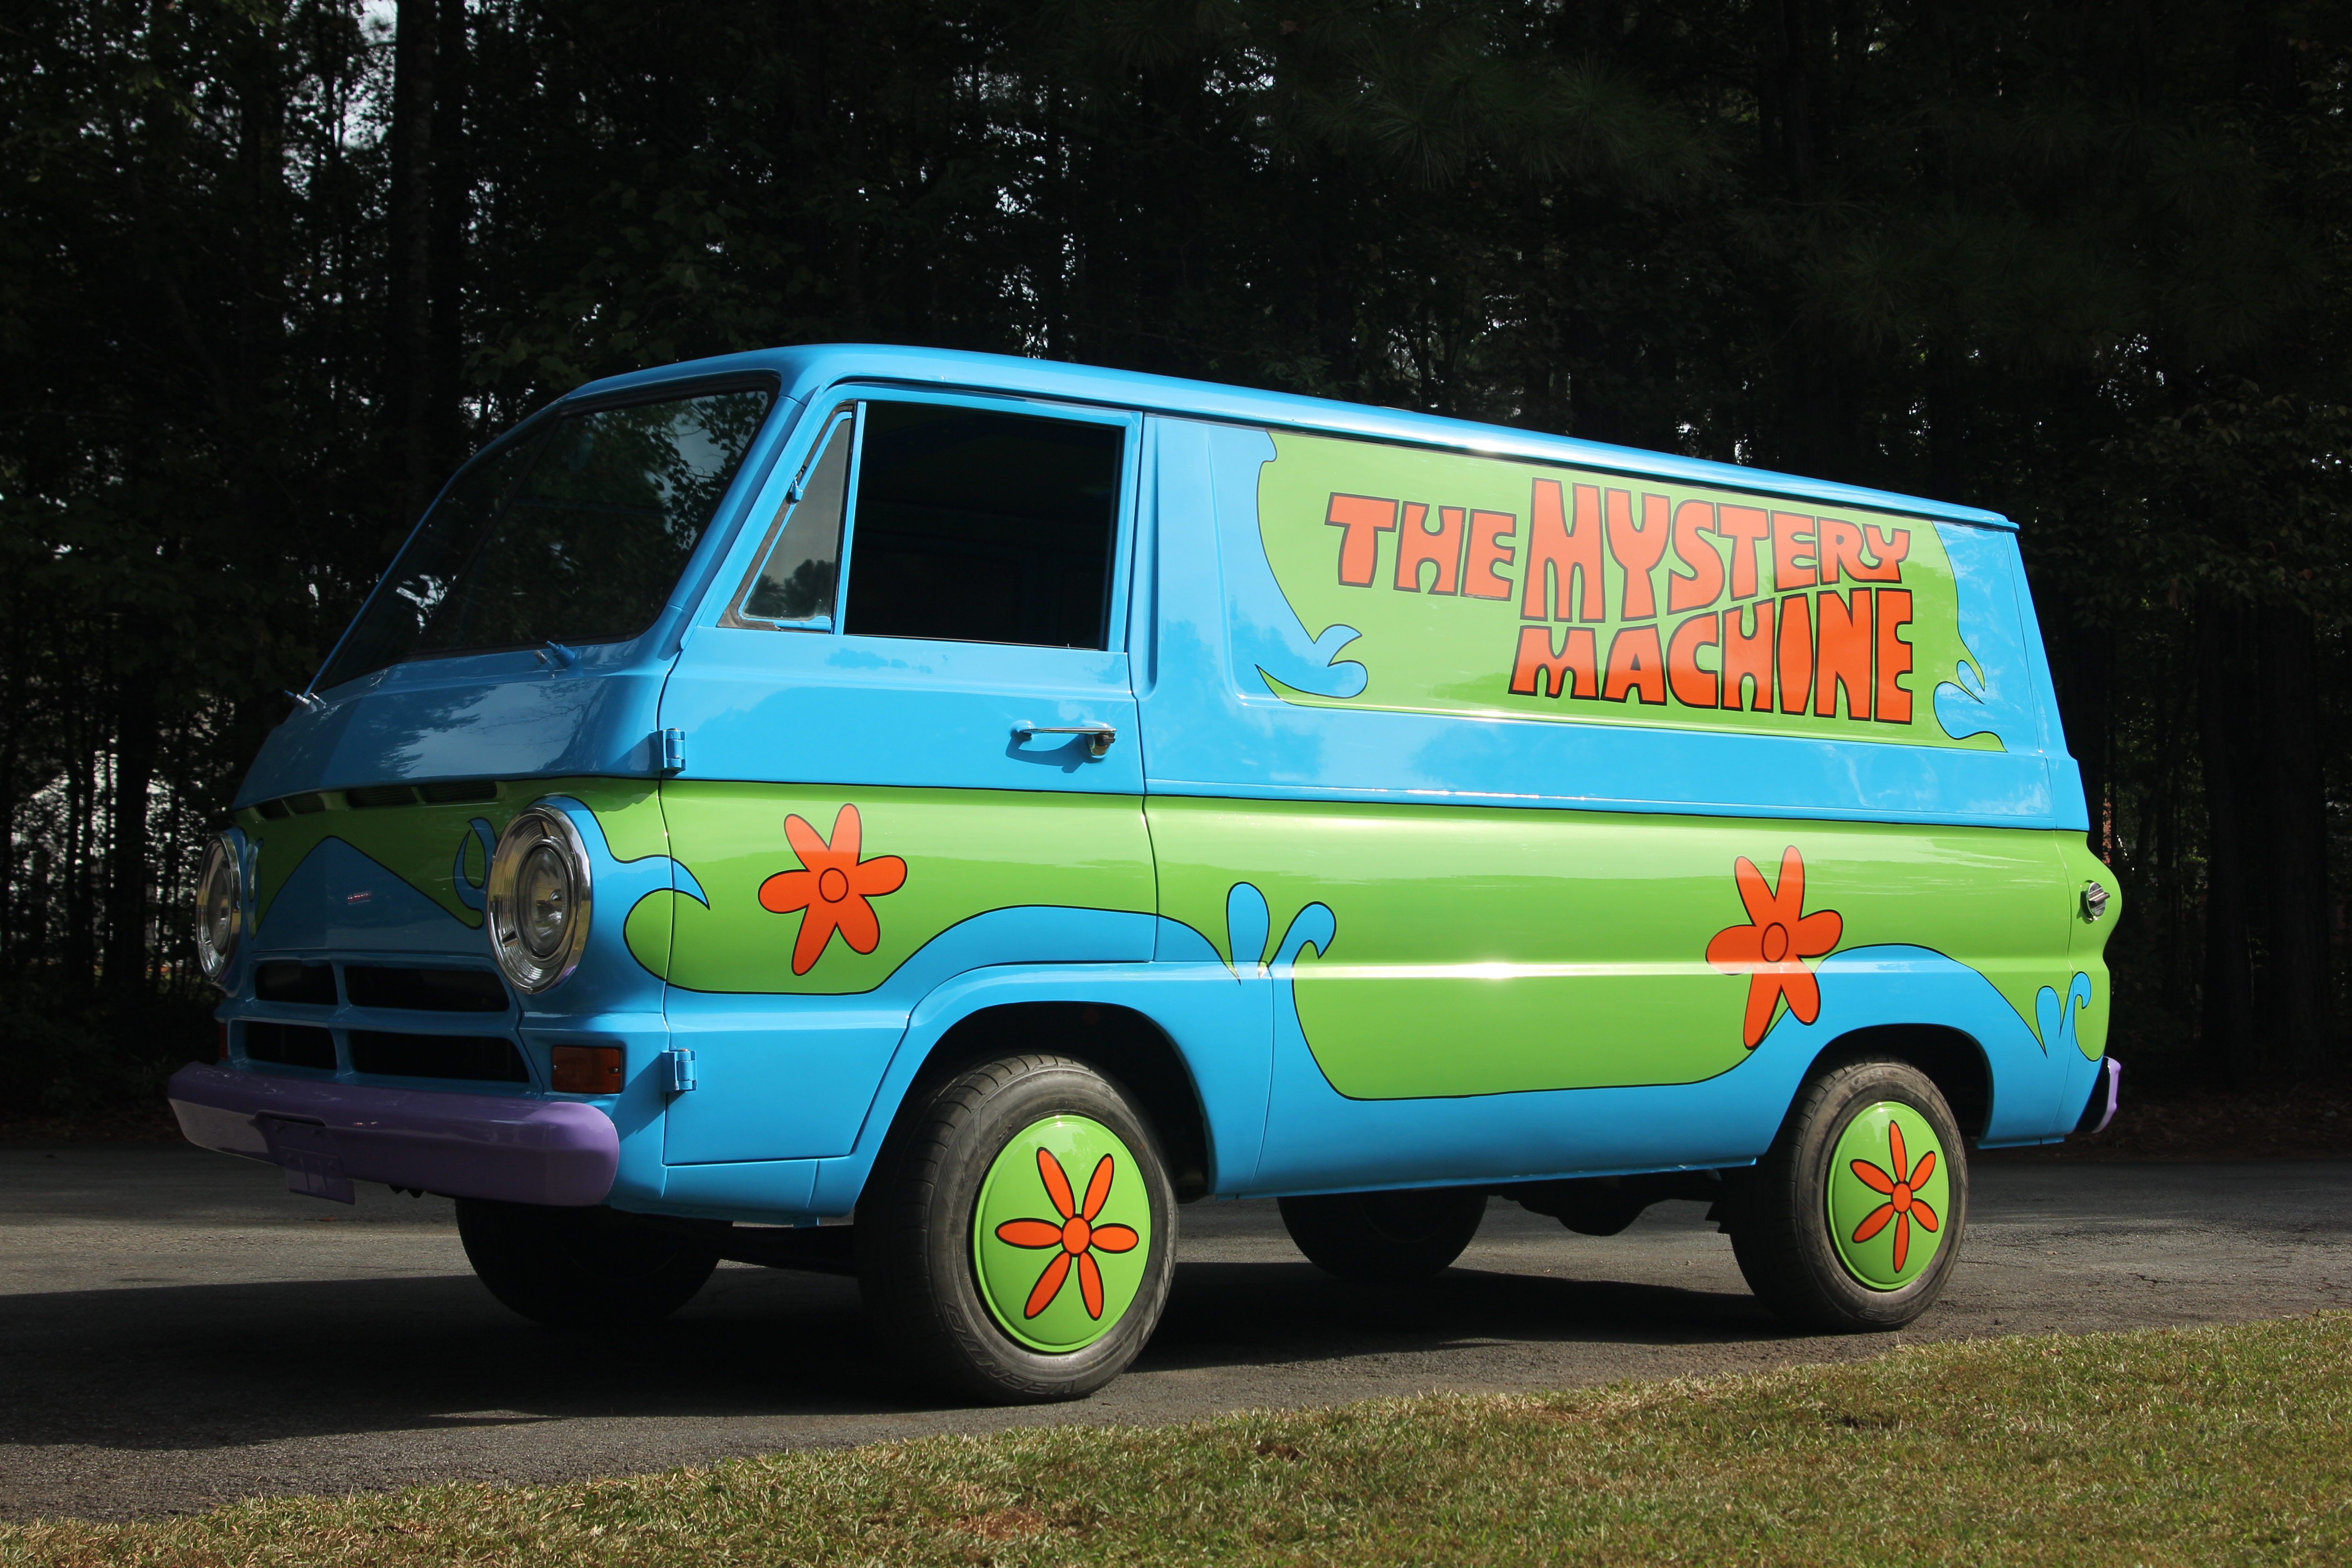 Mystery Mystery Machine, Who Are You?